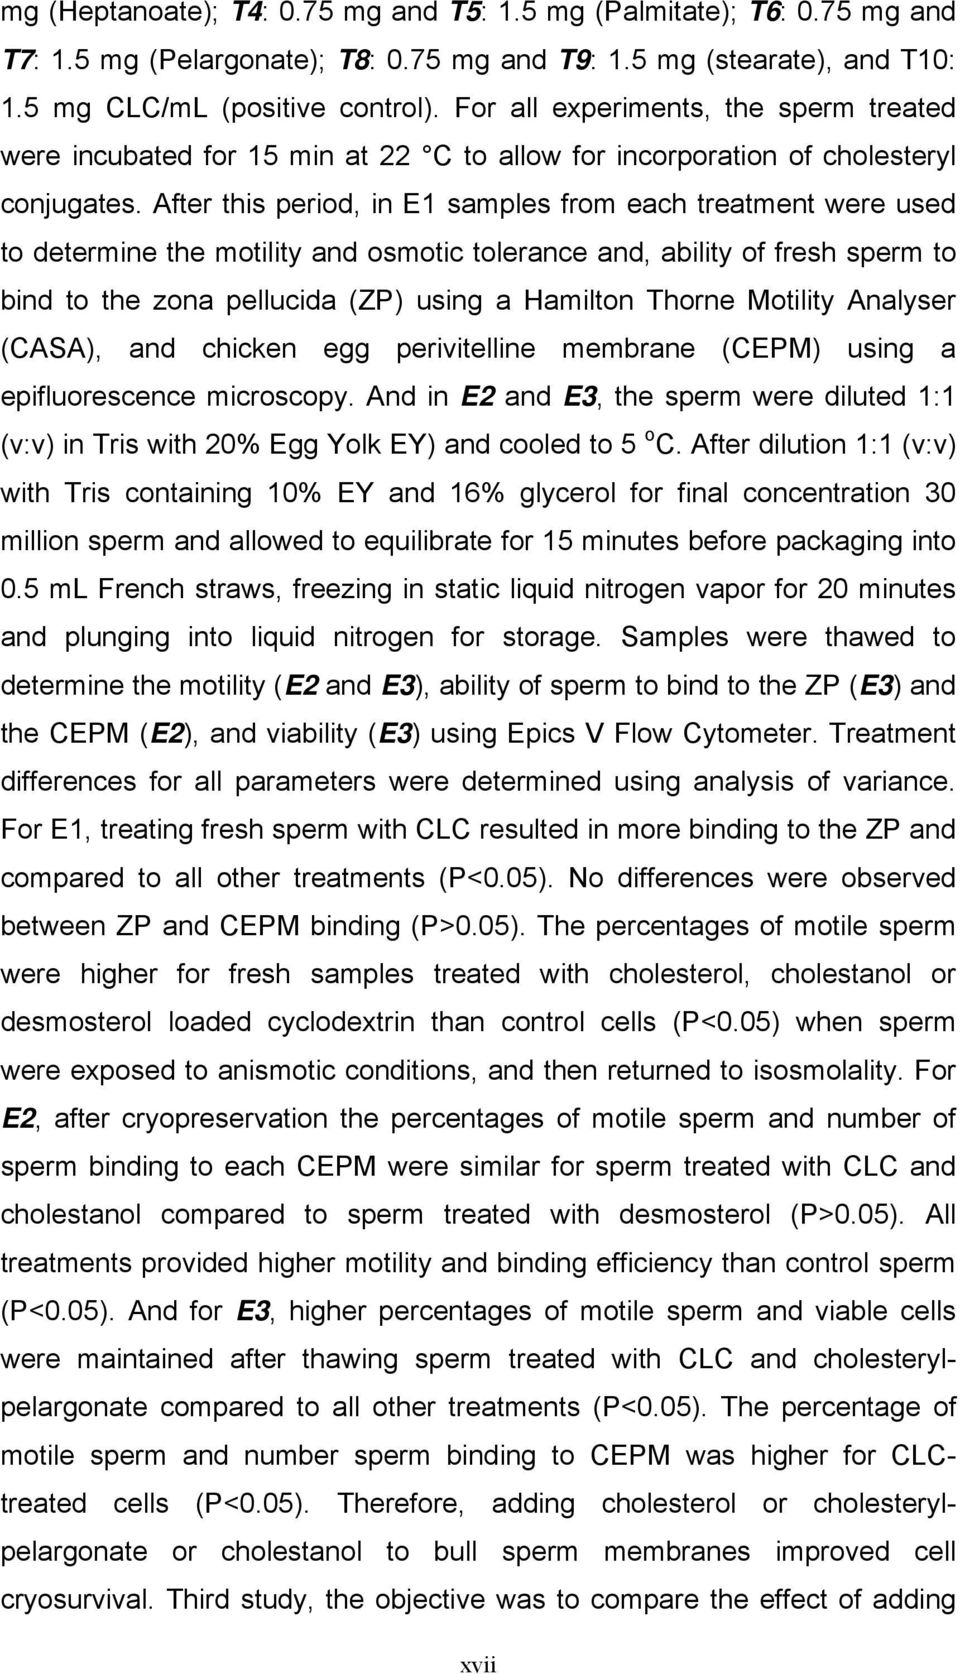 After this period, in E1 samples from each treatment were used to determine the motility and osmotic tolerance and, ability of fresh sperm to bind to the zona pellucida (ZP) using a Hamilton Thorne